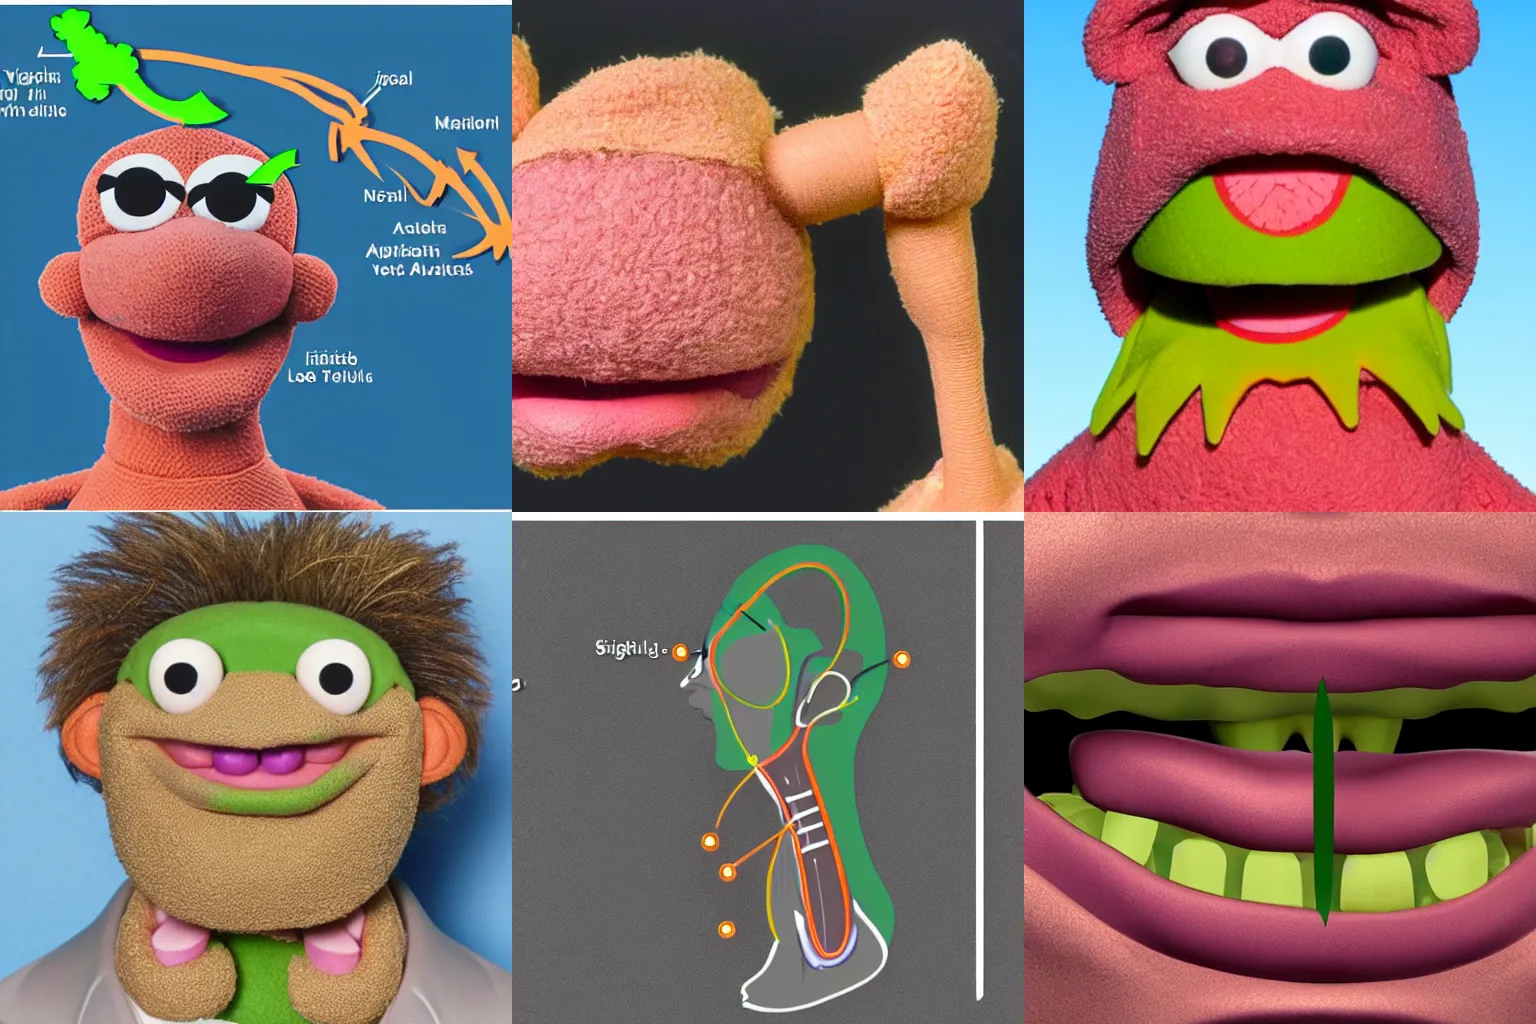 Prompt: FIGURE 6.9.1 Mid-sagittal oral vocal tract showing major areas of articulation for a muppet's oral vocal tract